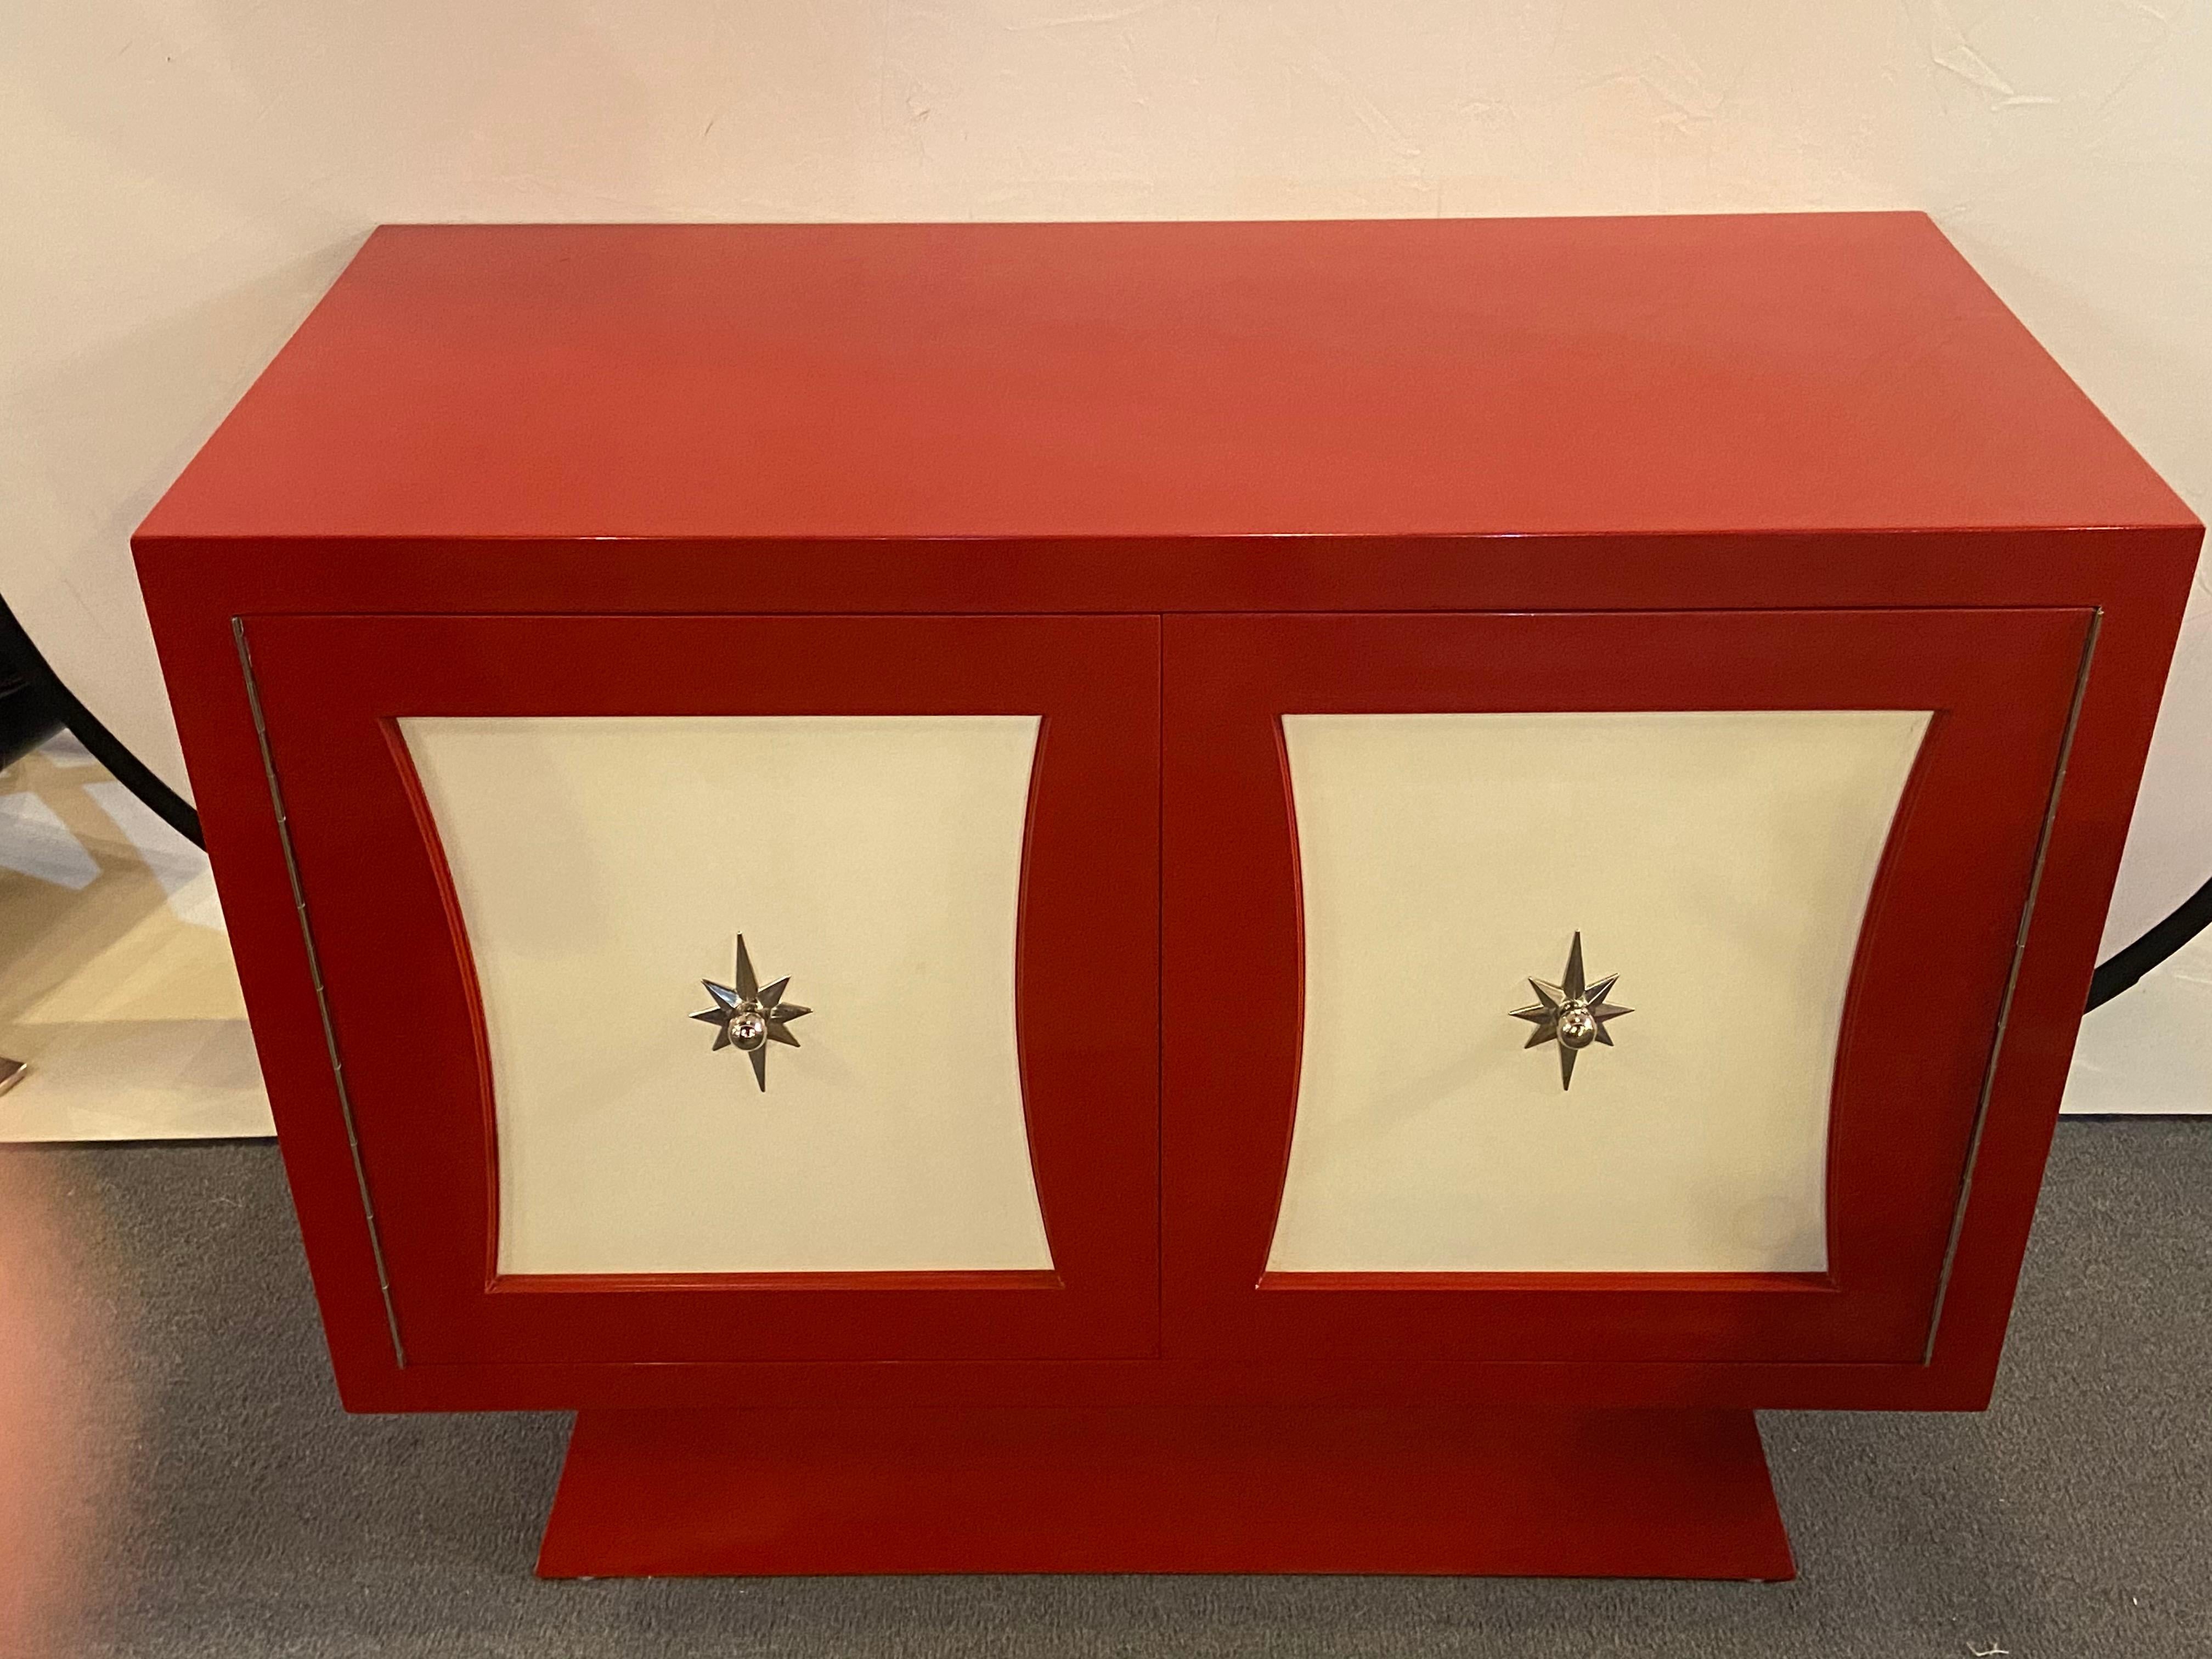 A  Mid Century Modern style Parzinger style cabinet, commode or server lacquered in red and white
A two-door fire-engine red and white lacquered Parzinger style cabinet. The stylish Mid-Century Modern cabinet features three custom fitted interior